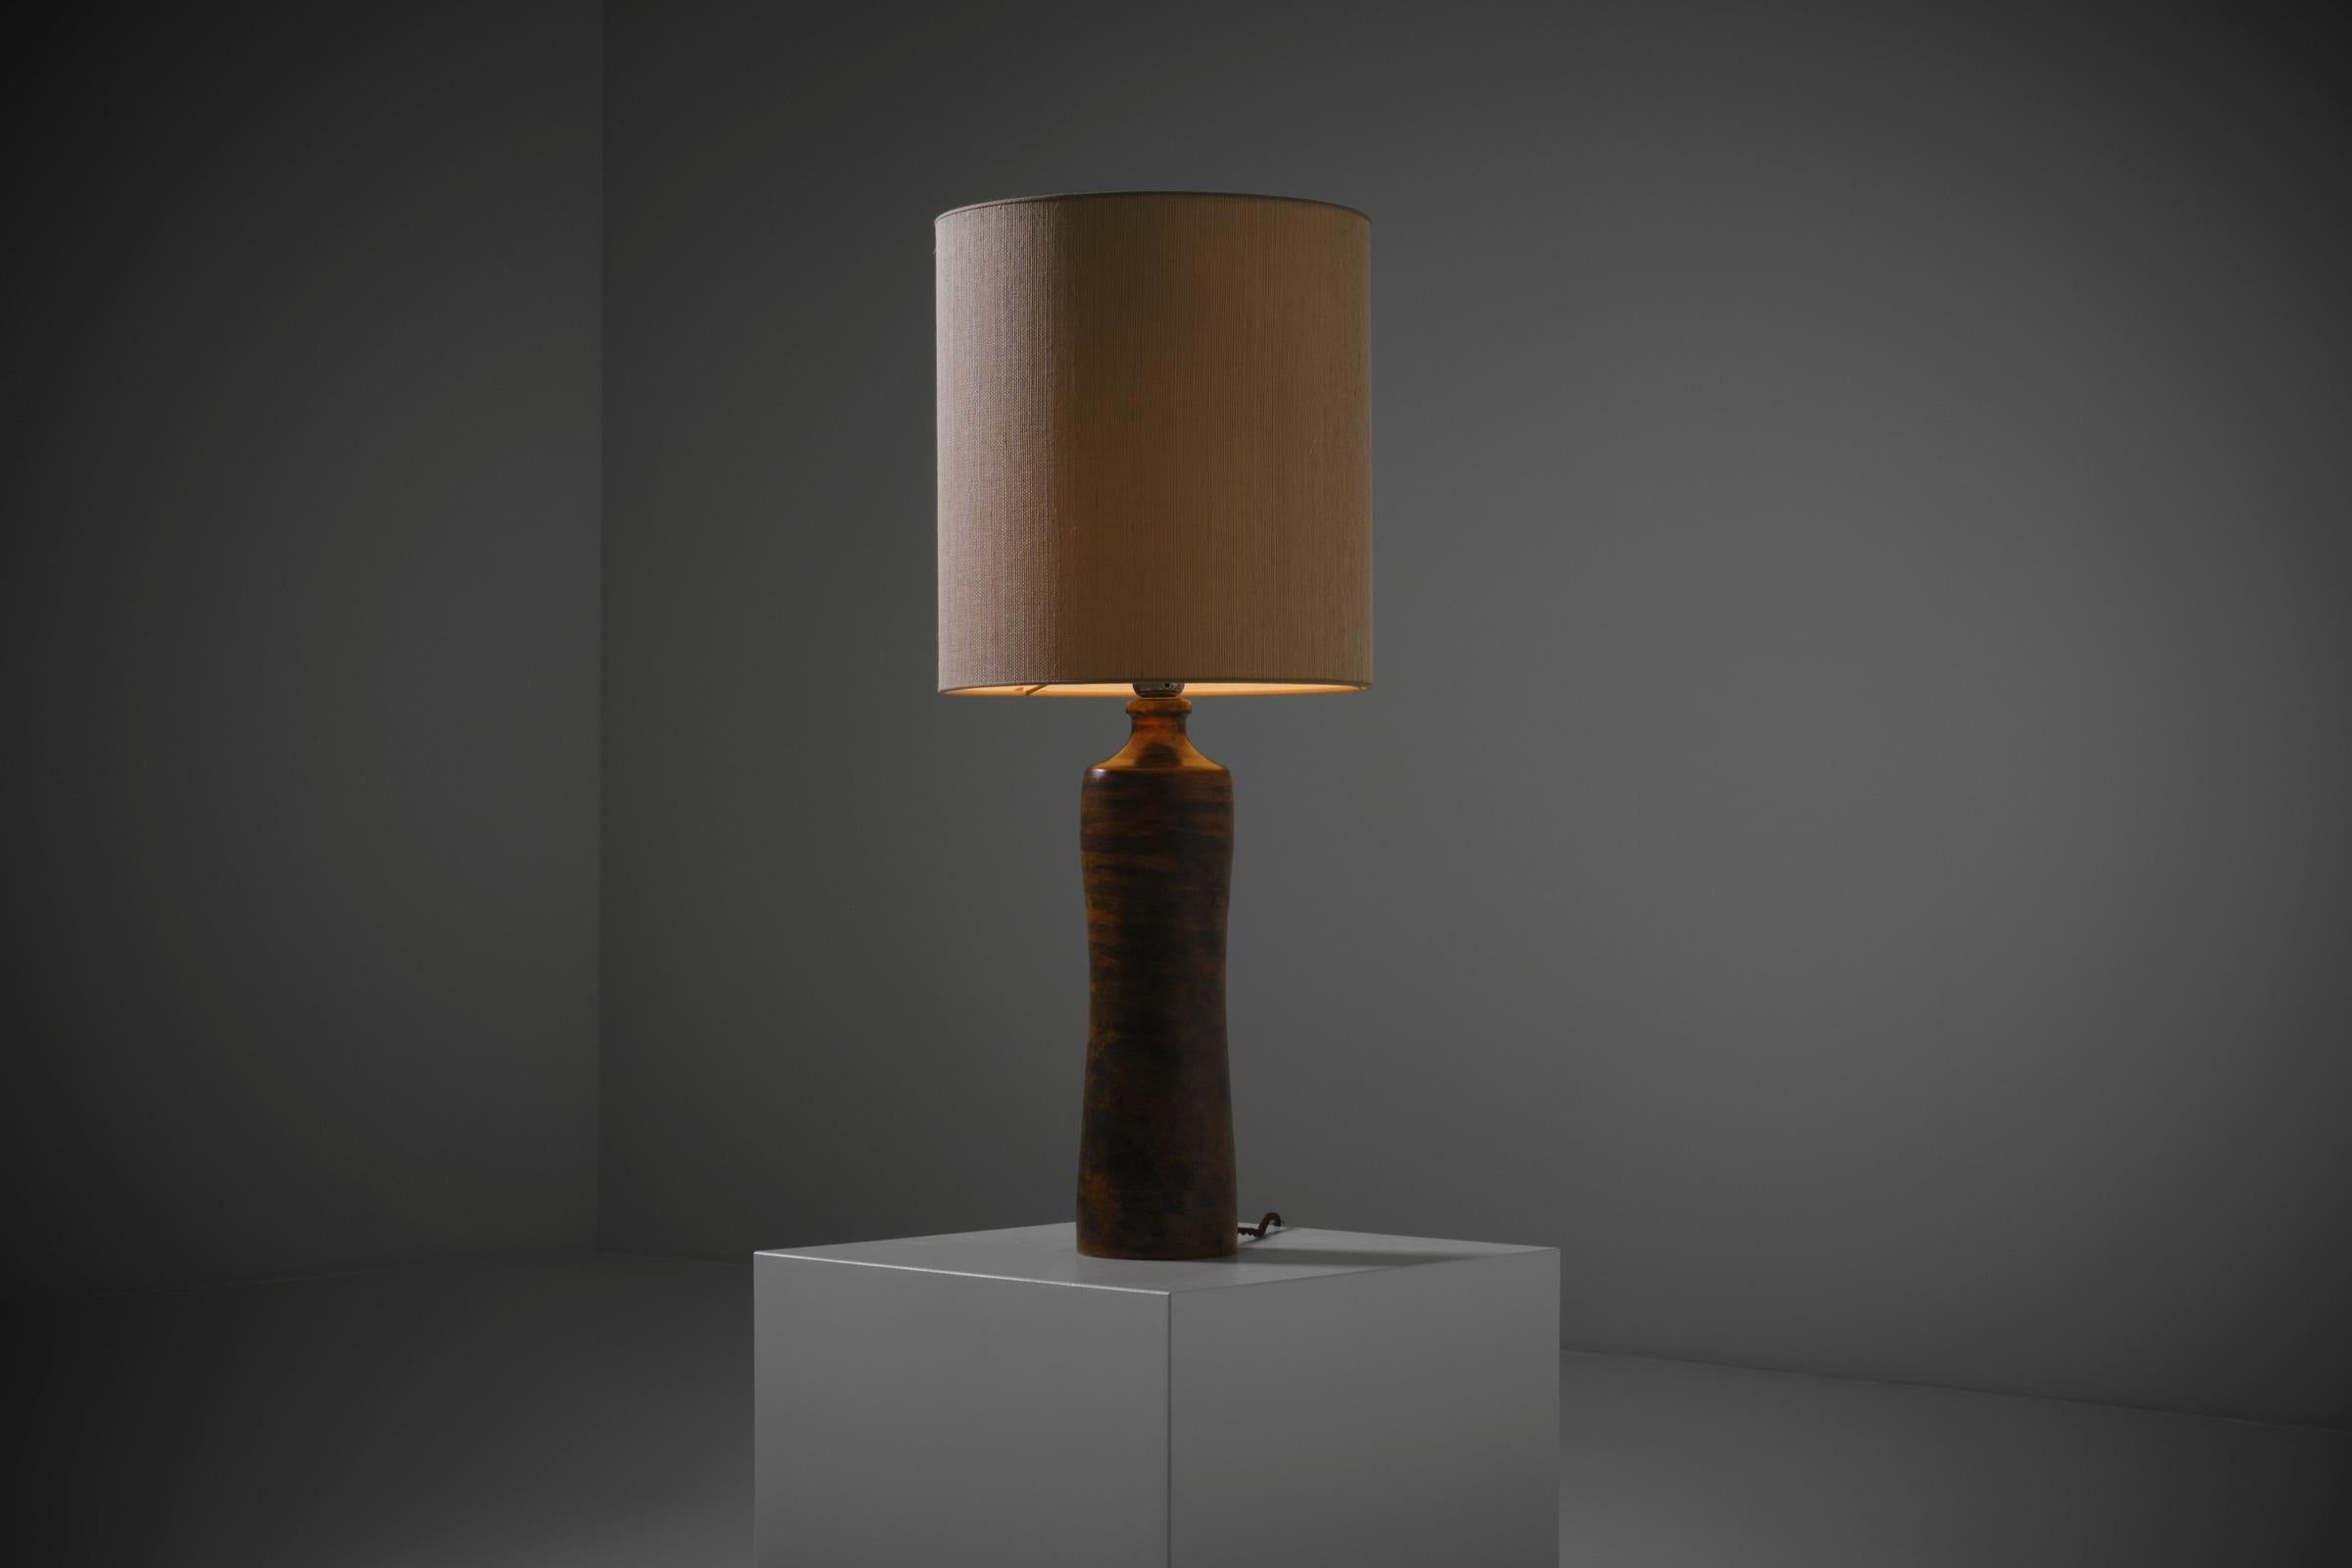 Jacques Blin Ceramic cylindrical table lamp, France 1960s. Beautiful abstract decoration of a dark brown cloudy pattern on a warm terra undertone. The lamp is provided with a natural raffia shade covered with linen inside. In excellent condition.